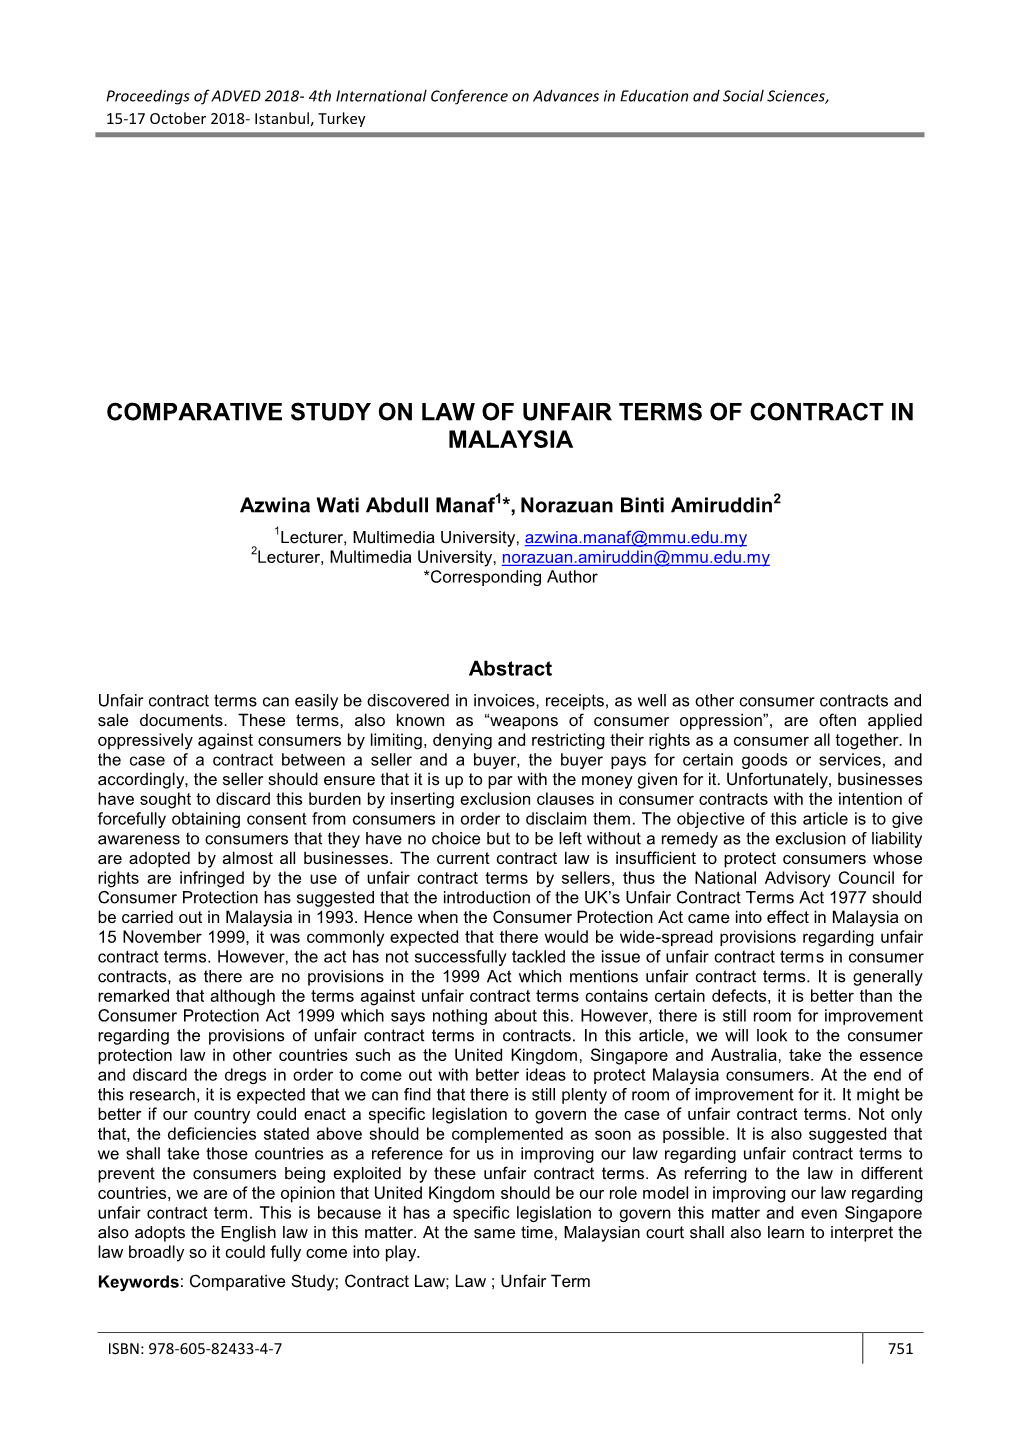 Comparative Study on Law of Unfair Terms of Contract in Malaysia